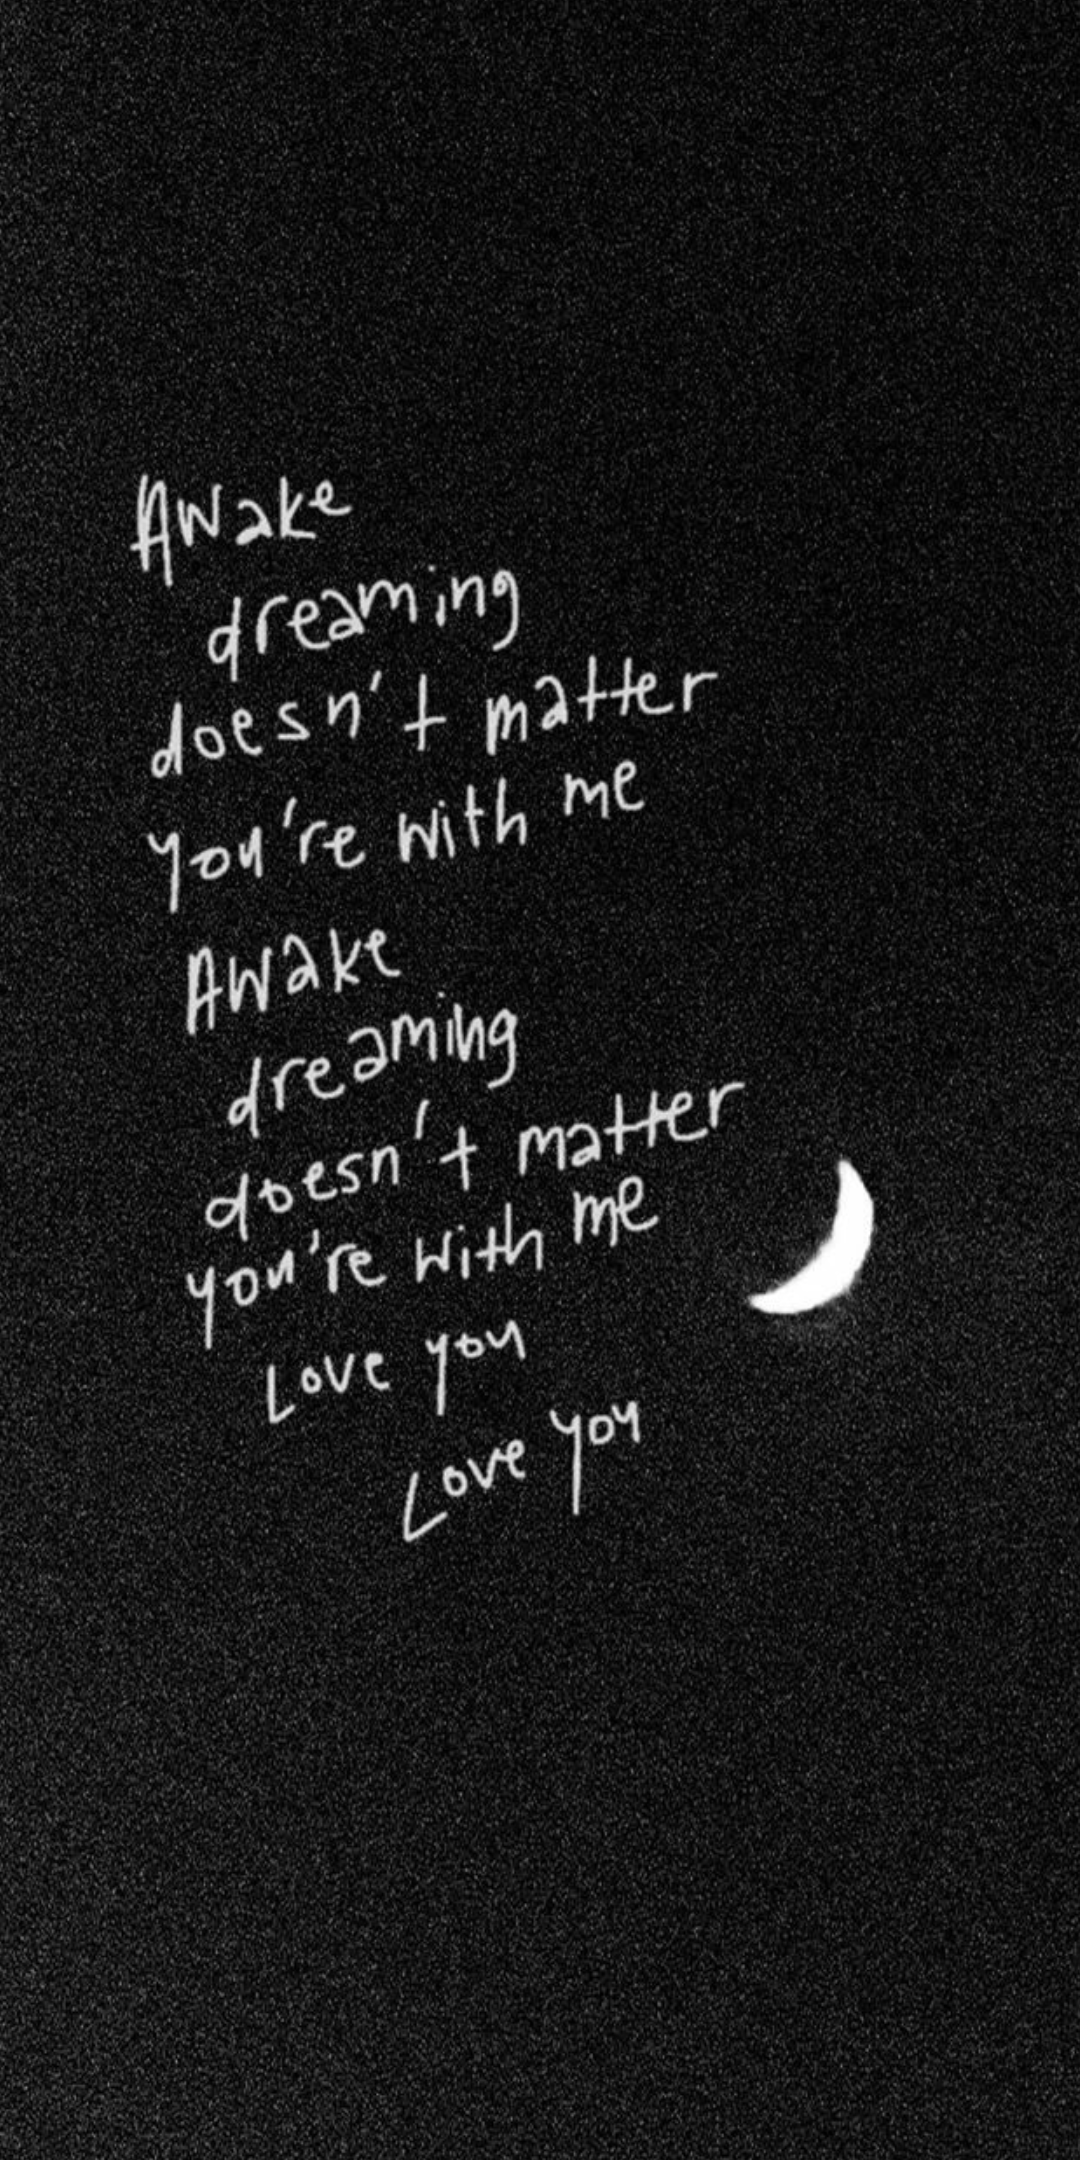 A black and white photo of a moon with the words 